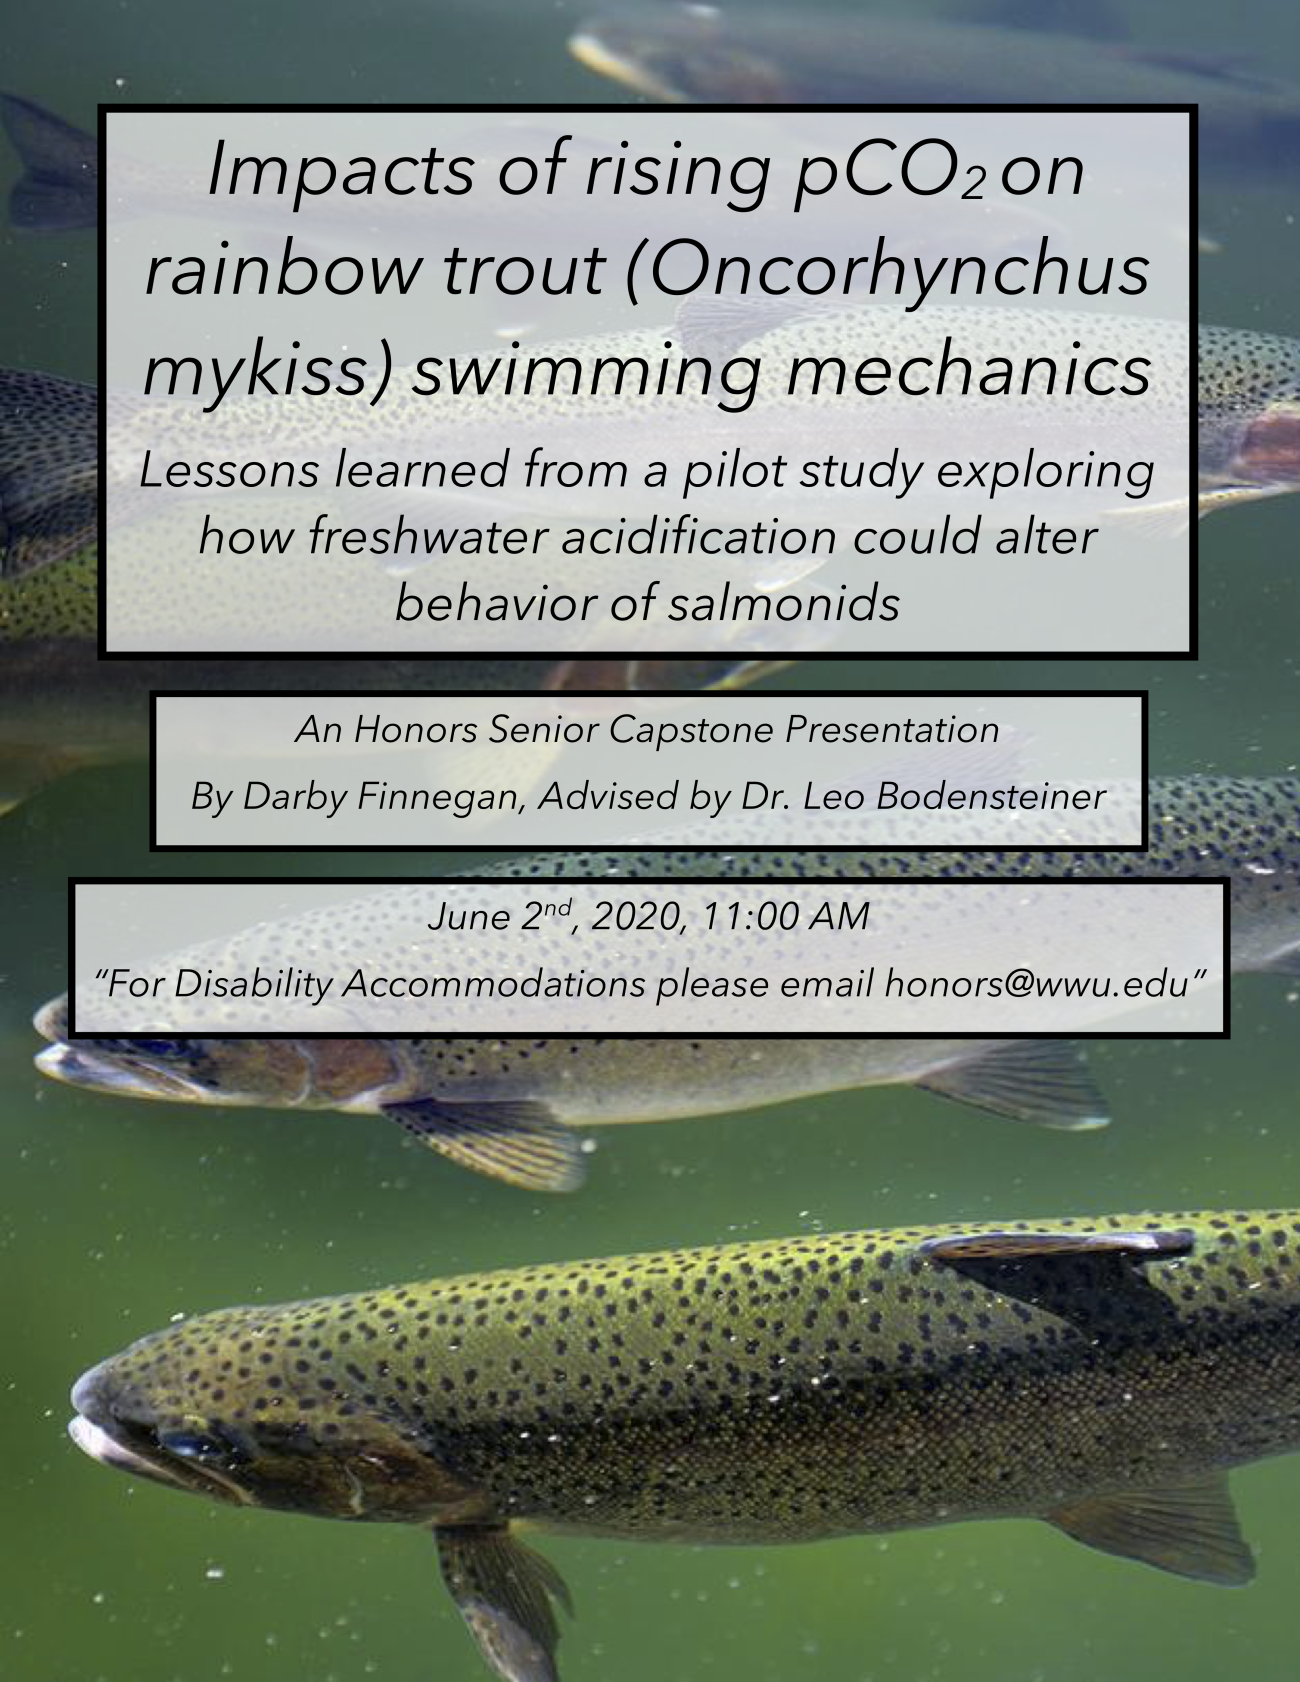 Image: Photo of a school of rainbow trout. Text: "Impacts of rising pCO2 on rainbow trout (Oncorhynchus mykiss) swimming mechanics. Lessons learned from a pilot study exploring how freshwater acidification could alter behavior of salmonids. An Honors Senior Capstone Presentation. By Darby Finnegan, Advised by Dr. Leo Bodensteiner. June 2nd, 2020, 11:00 AM. For Disability Accommodations please email honors@wwu.edu."